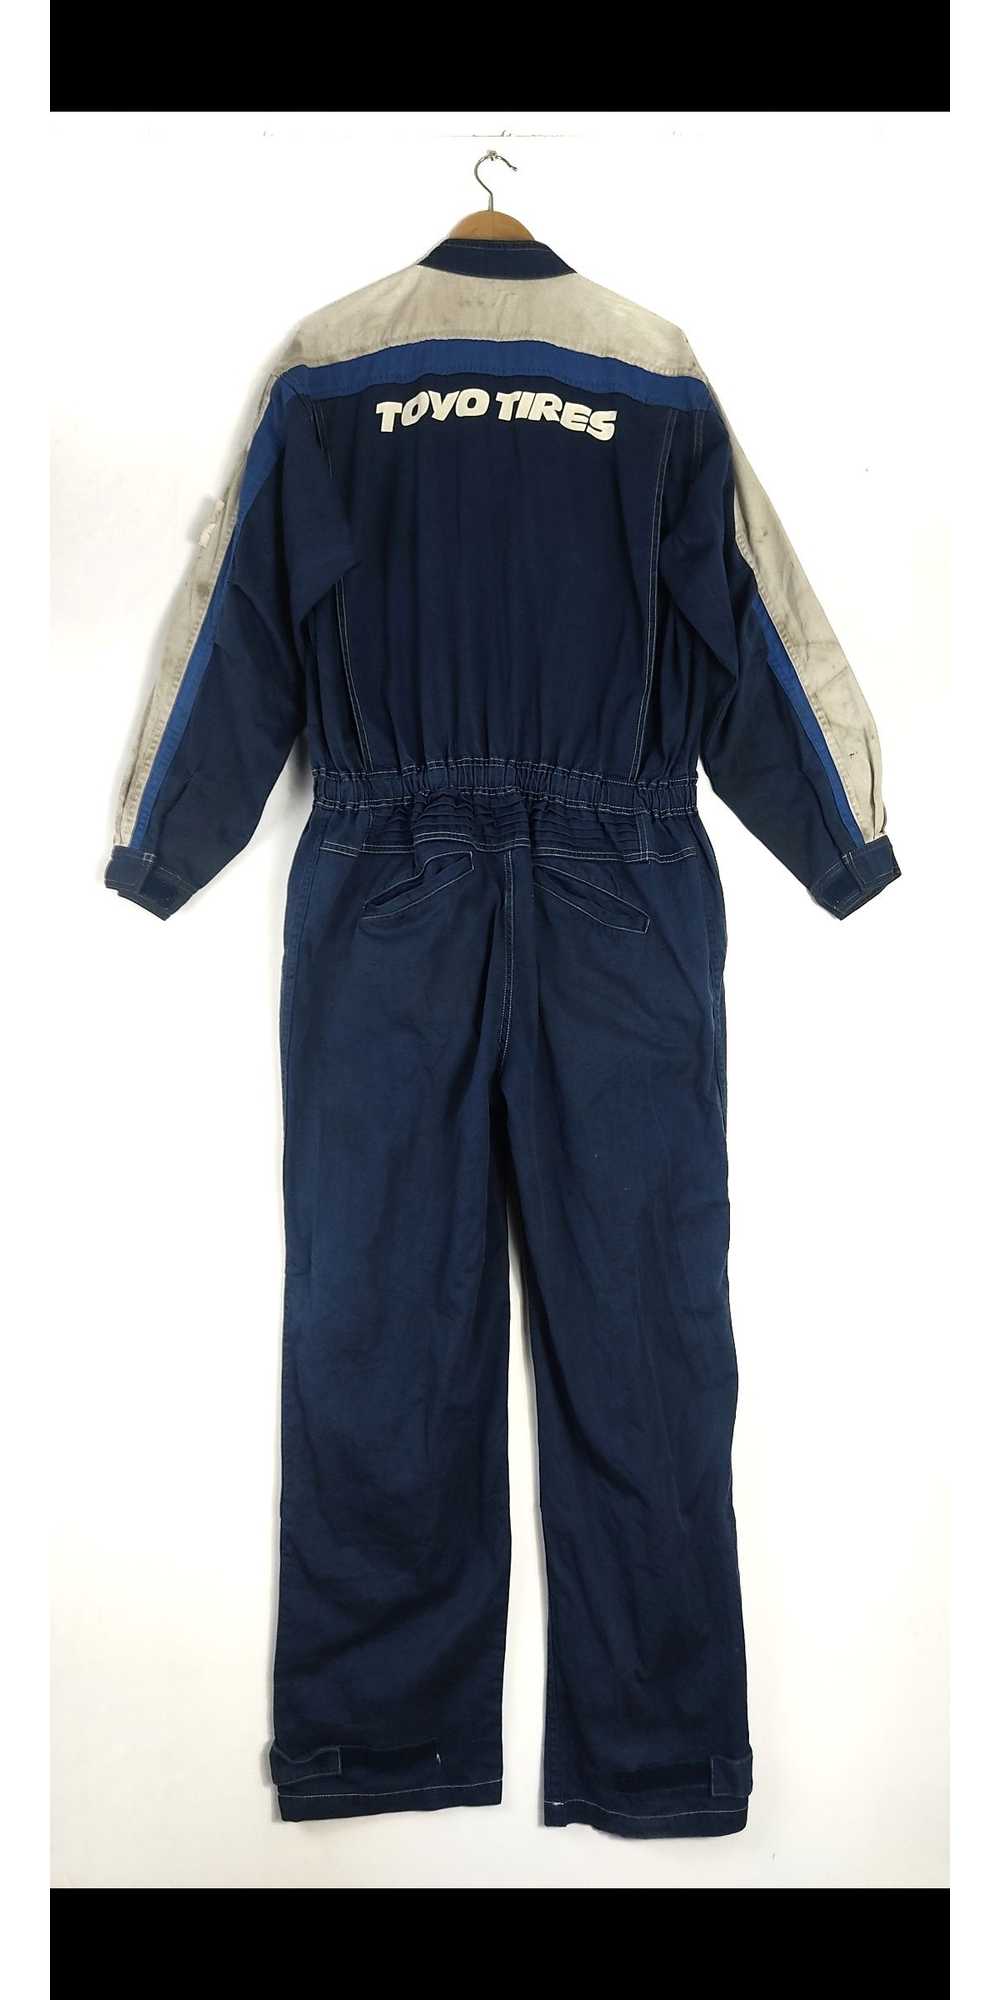 Japanese Brand TOYO TIRES overalls - image 1